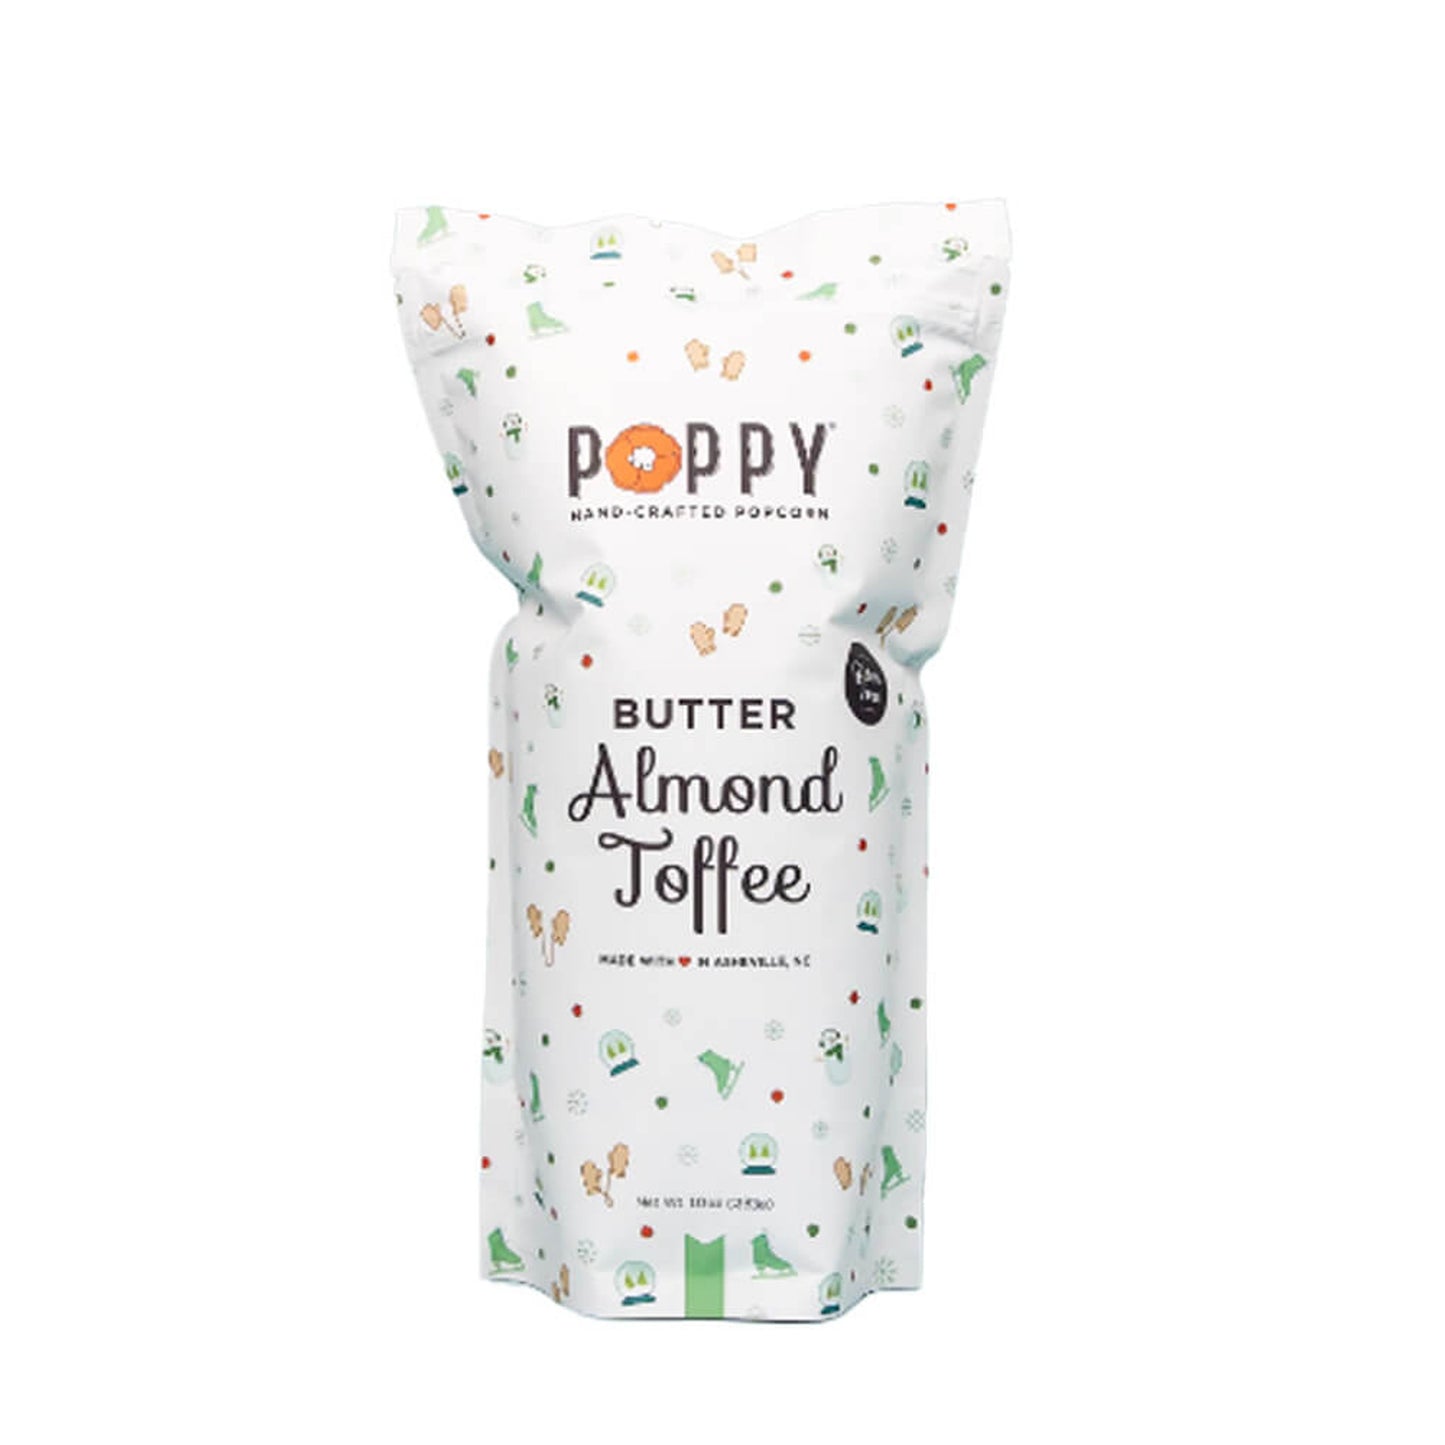 Butter Almond Toffee Holiday Market Bag